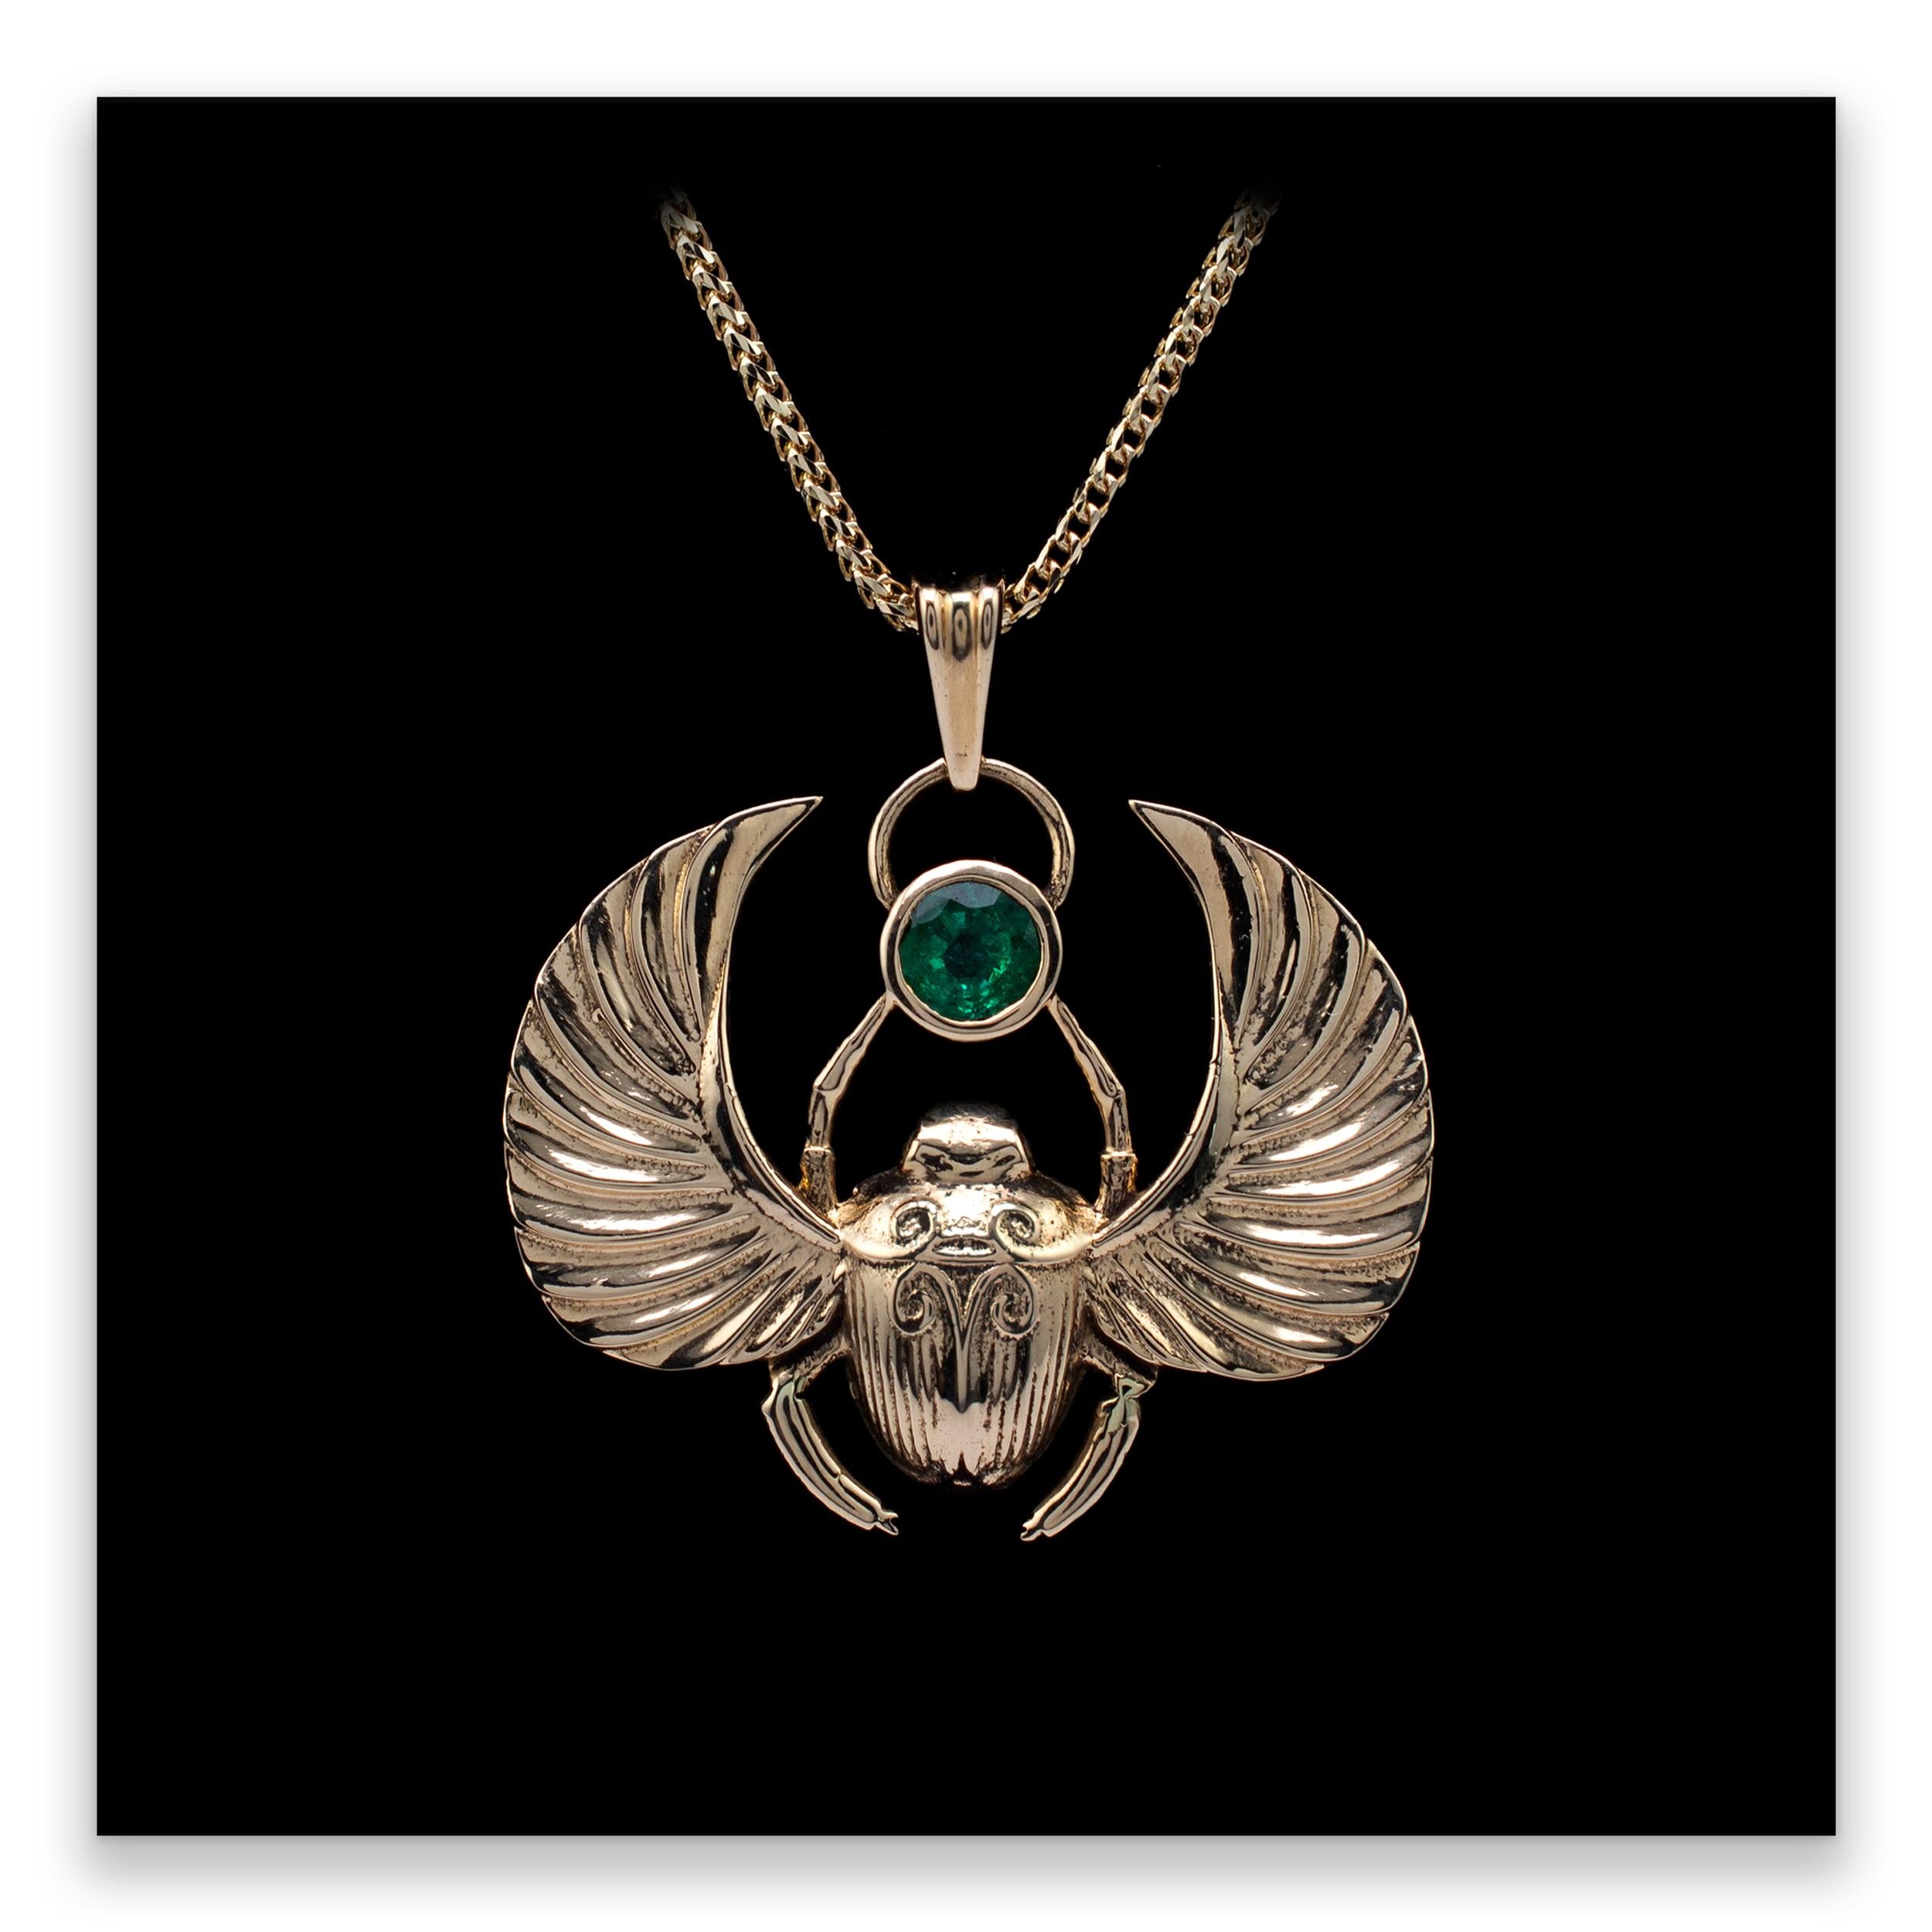 Egyptian Scarab Beetle Pendant Necklace 14K Gold, 0.50 Carat Natural Emerald In Excellent Condition For Sale In Preston, Lancashire